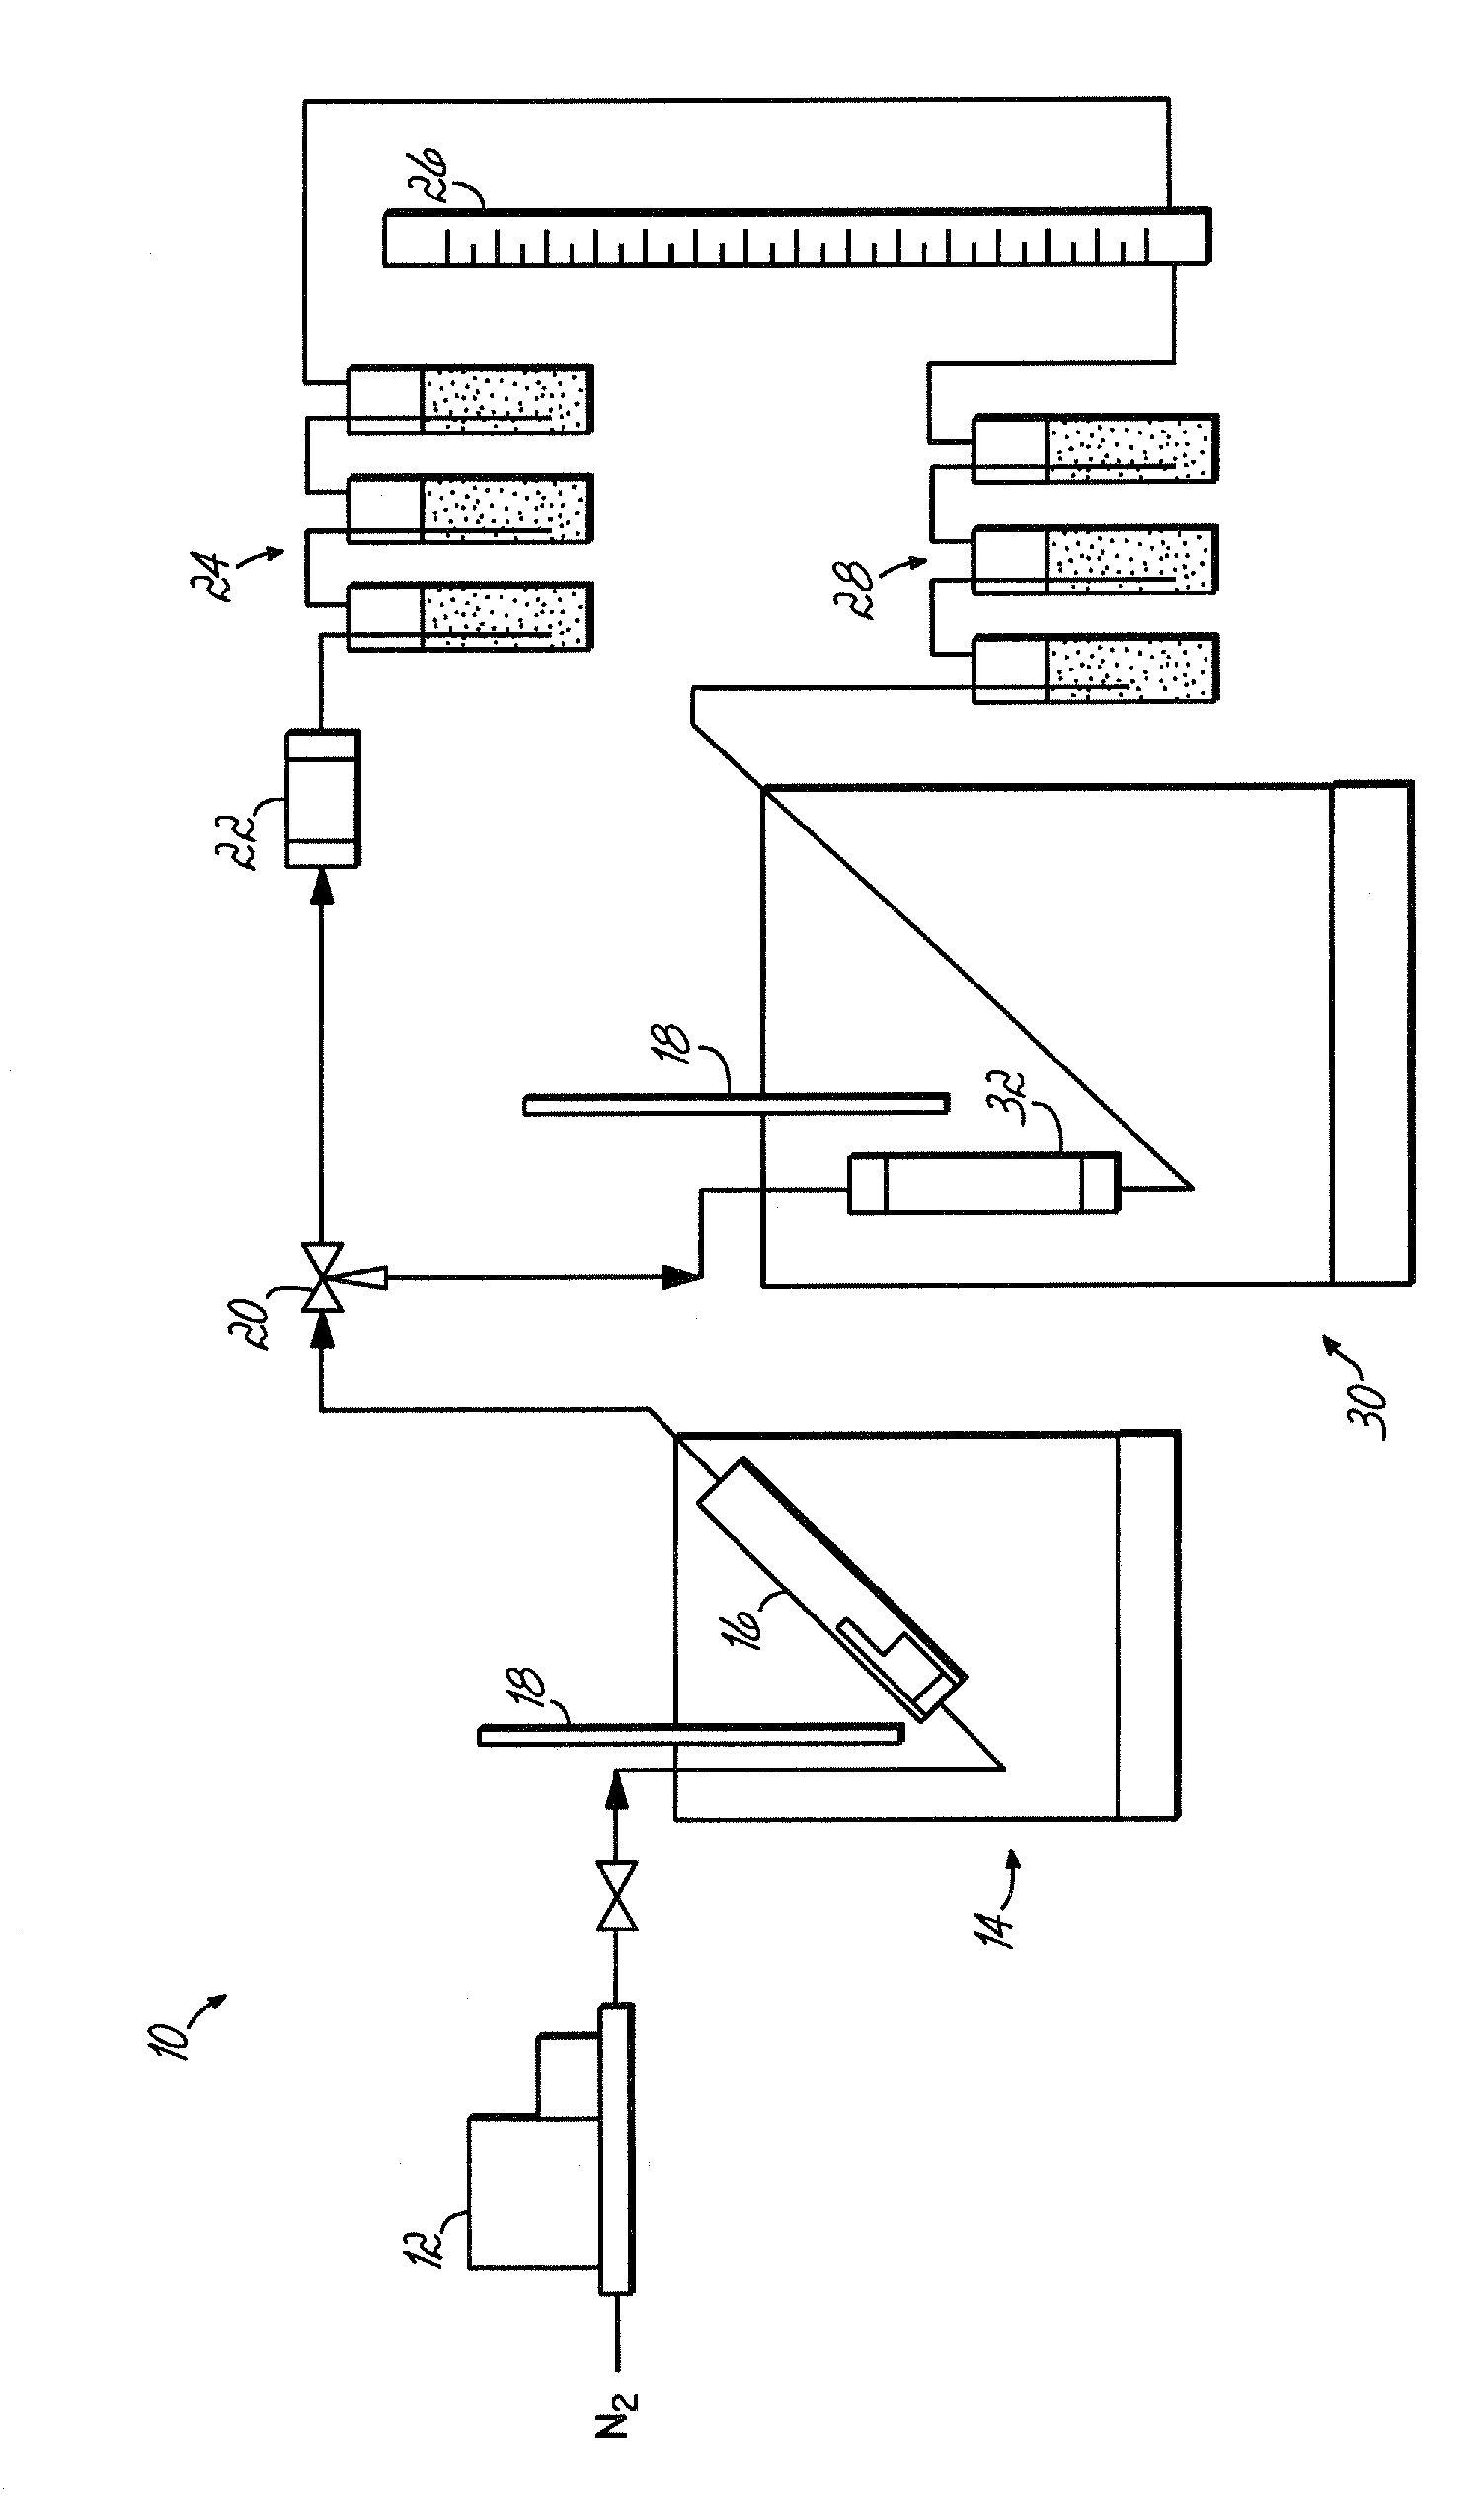 High capacity materials for capture of metal vapors from gas streams